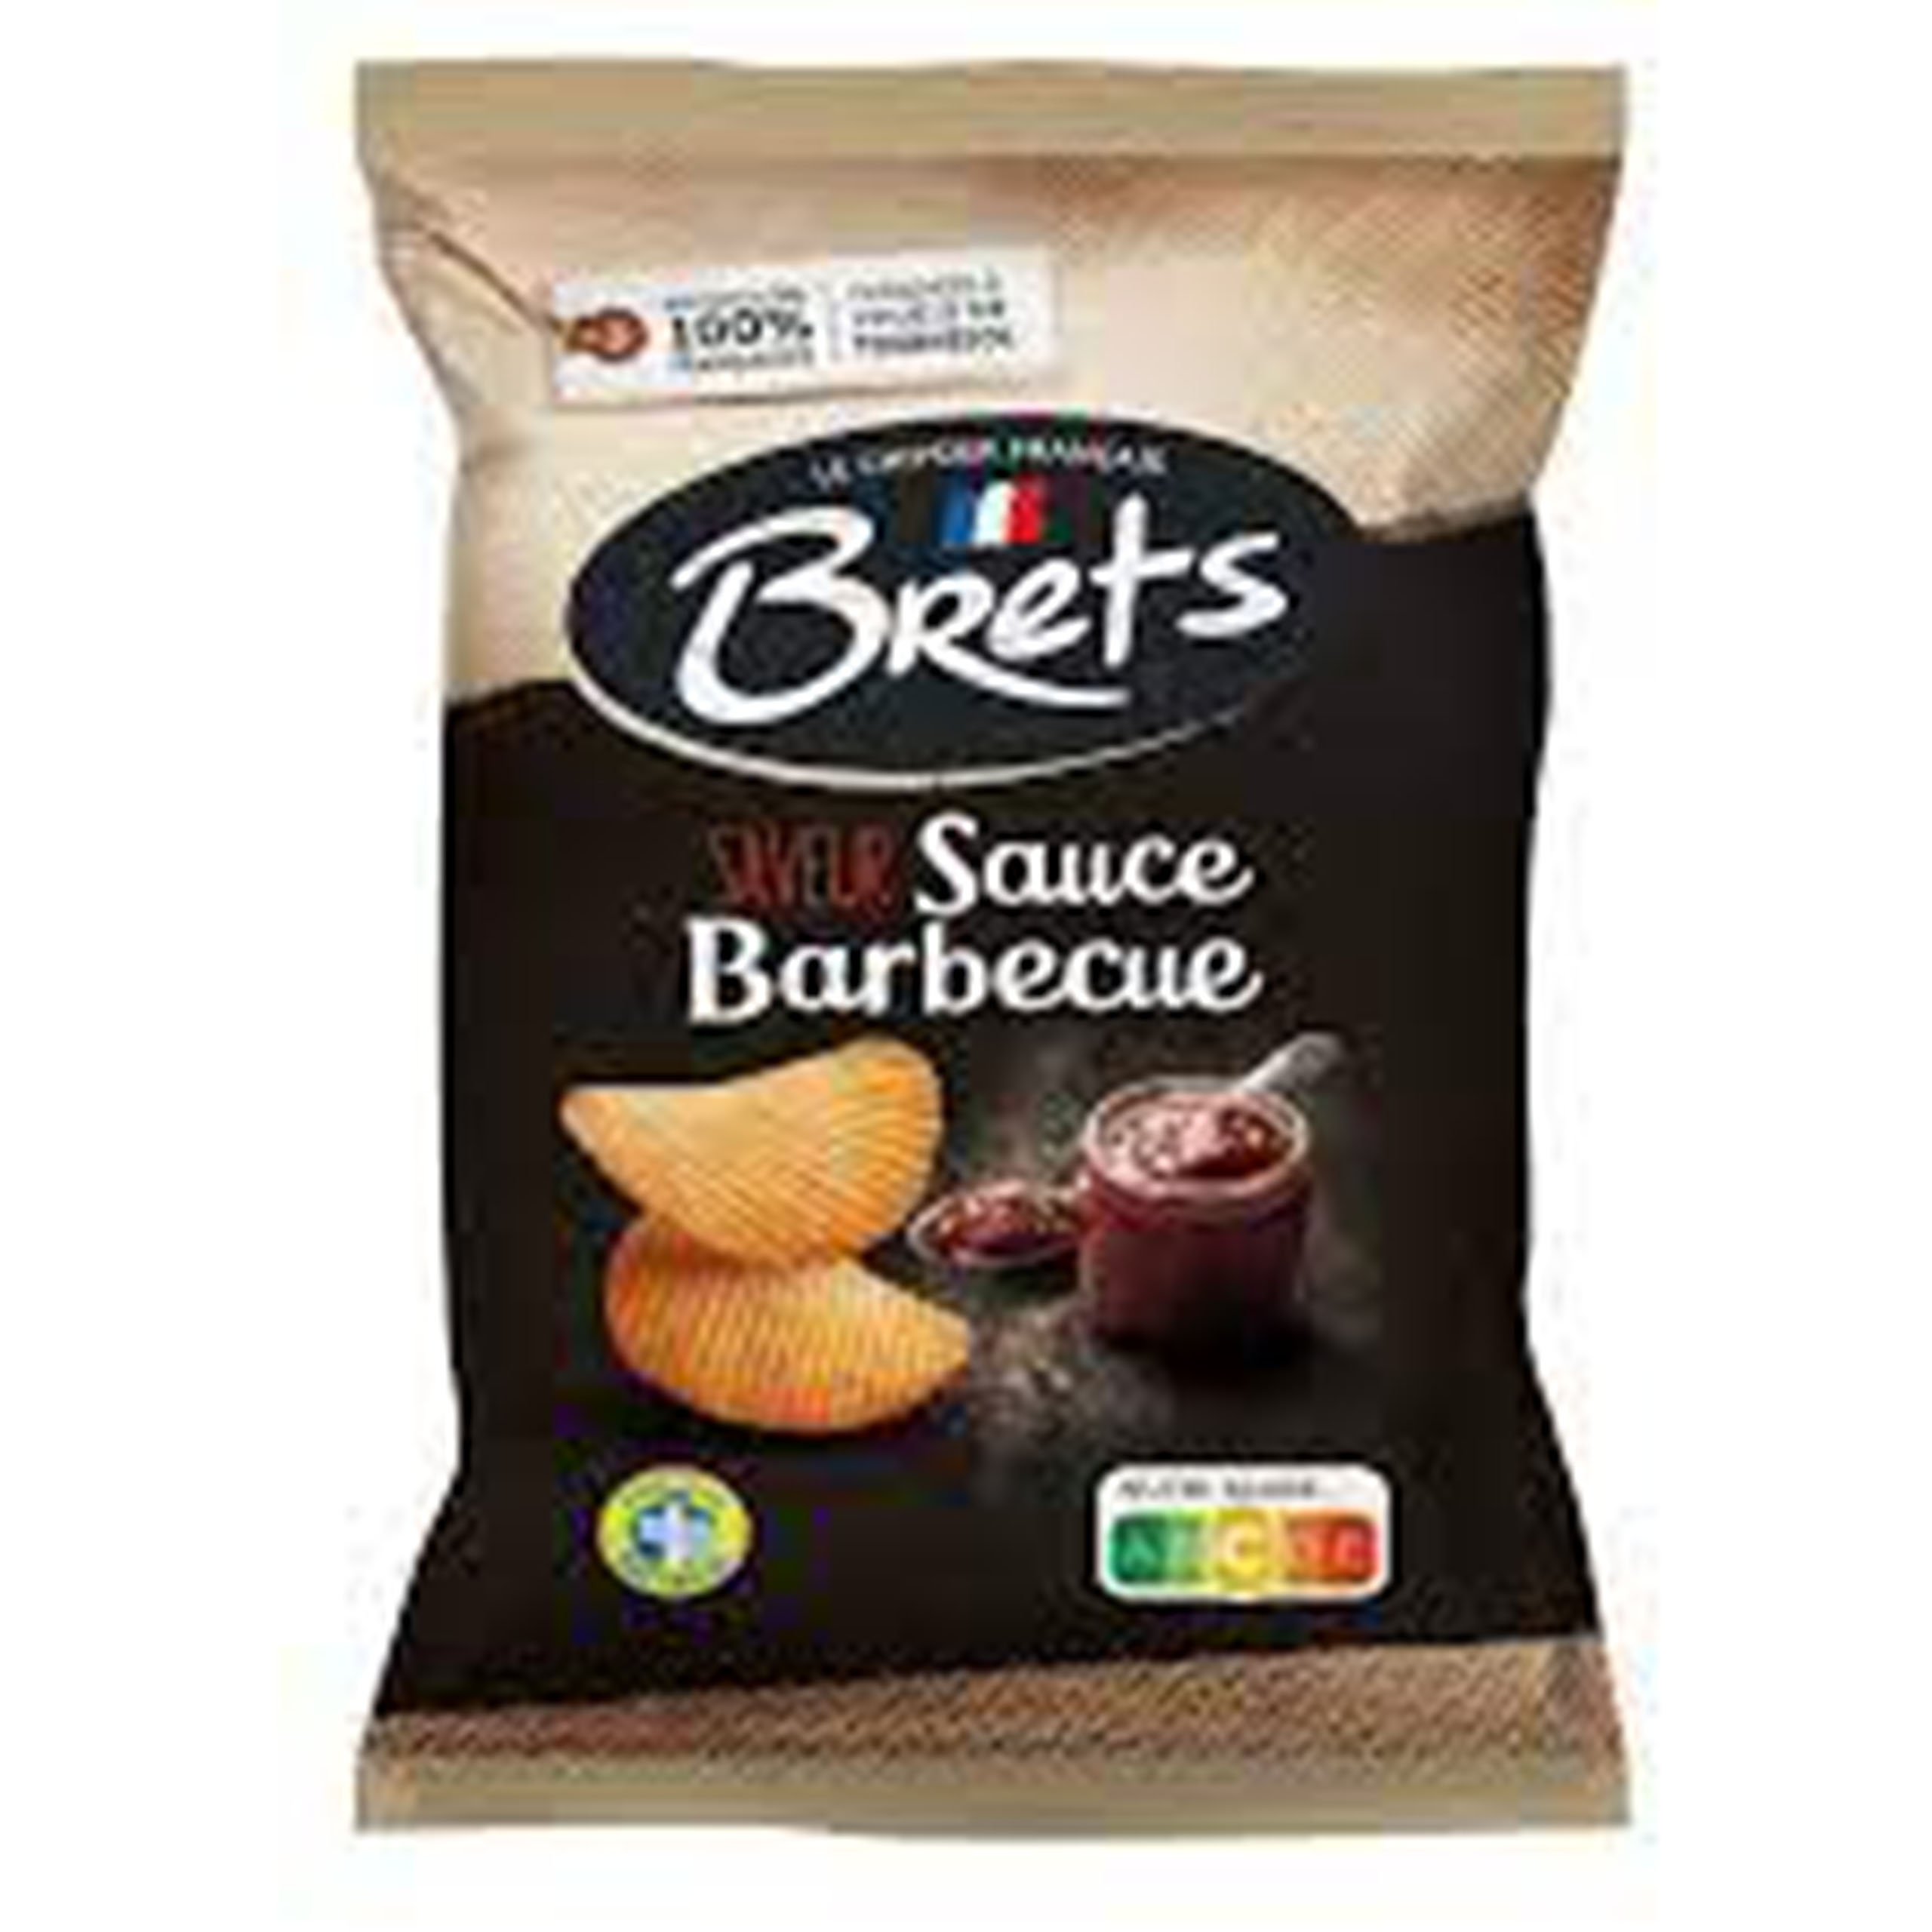 CHIPS BRETS BARBECUE